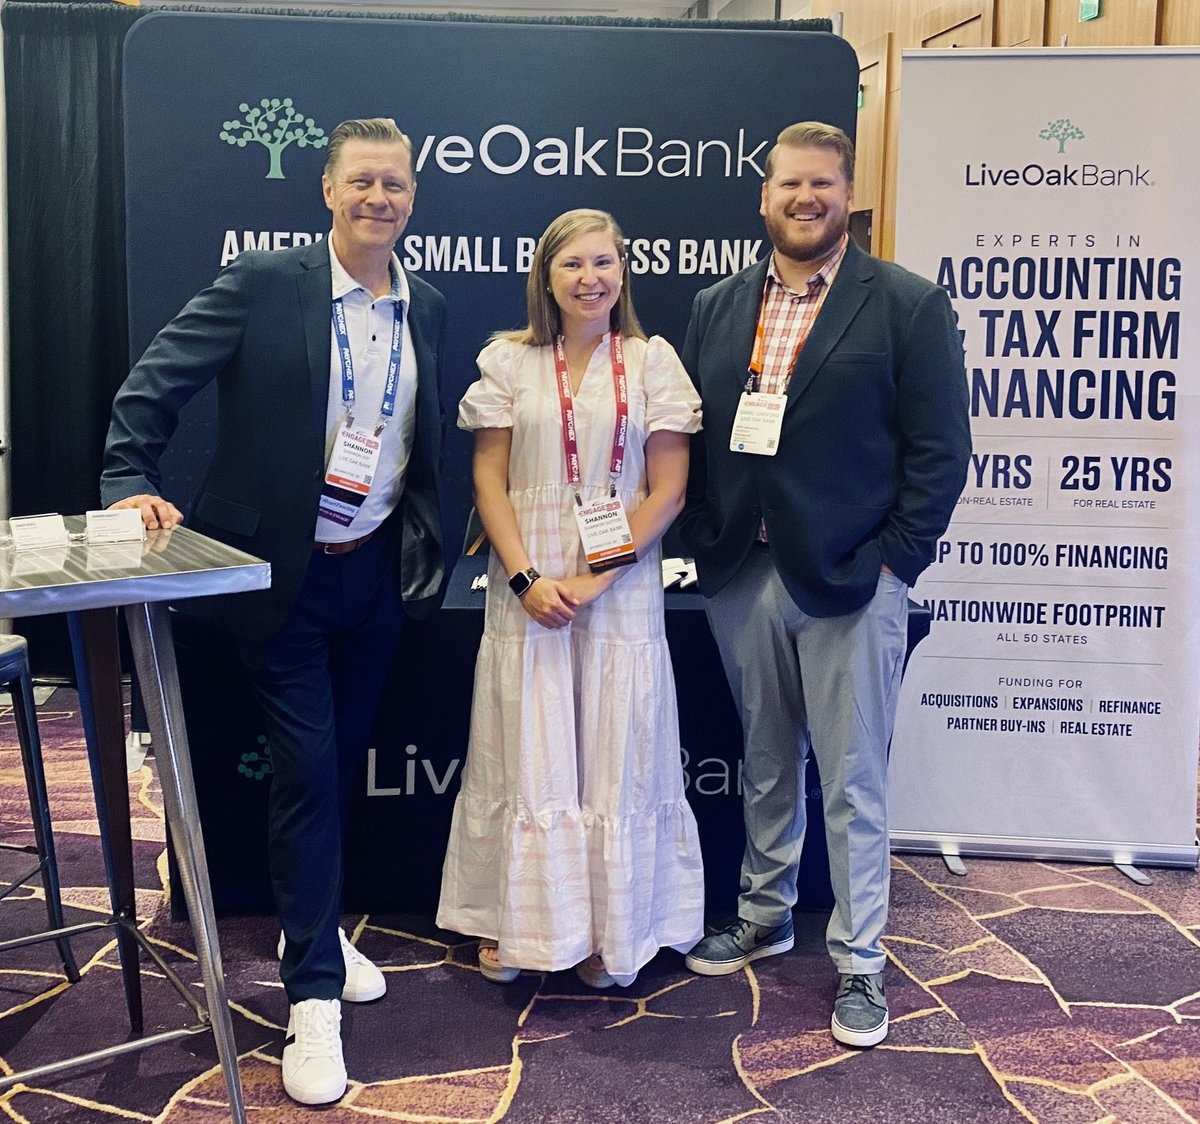 Thank you #AICPA. We had an amazing time meeting new friends and finding new deals at #Engage #Engage23  We love the accounting industry. Please lean into our experts when funding your next accounting firm acquisition.